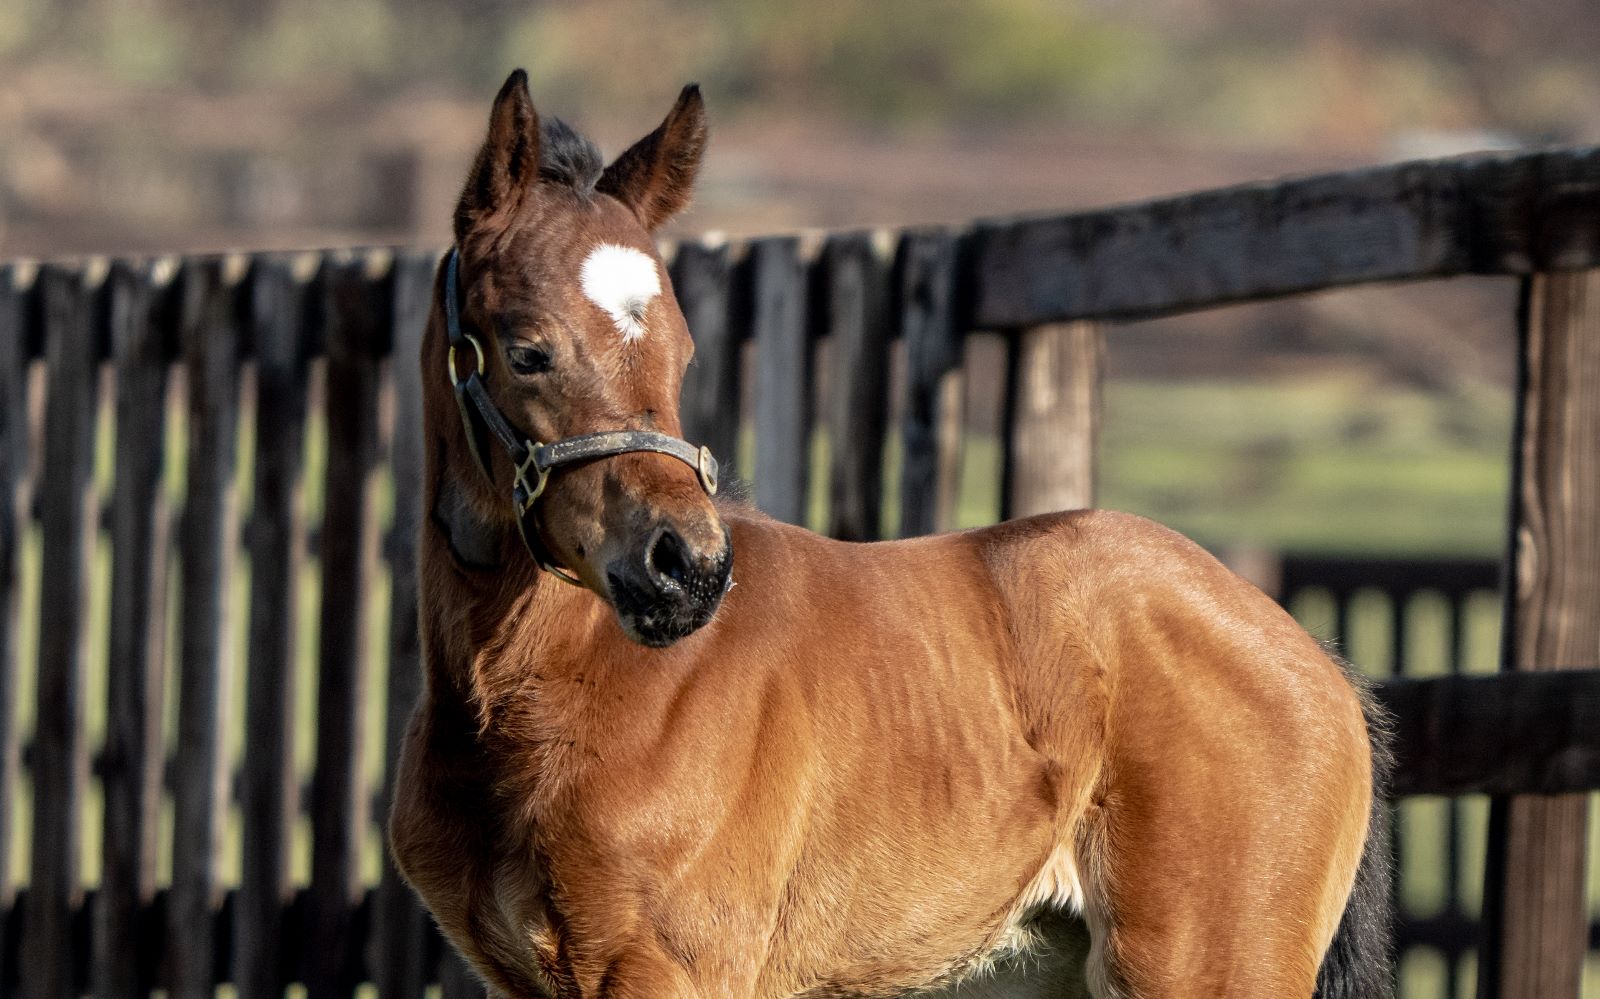 ‘Charming filly’: the winning Kodiac mare Breath Of Joy produced a Palace Pier foal in early February for Imad Alsagar’s Blue Diamond Stud. Photo: Equus Images